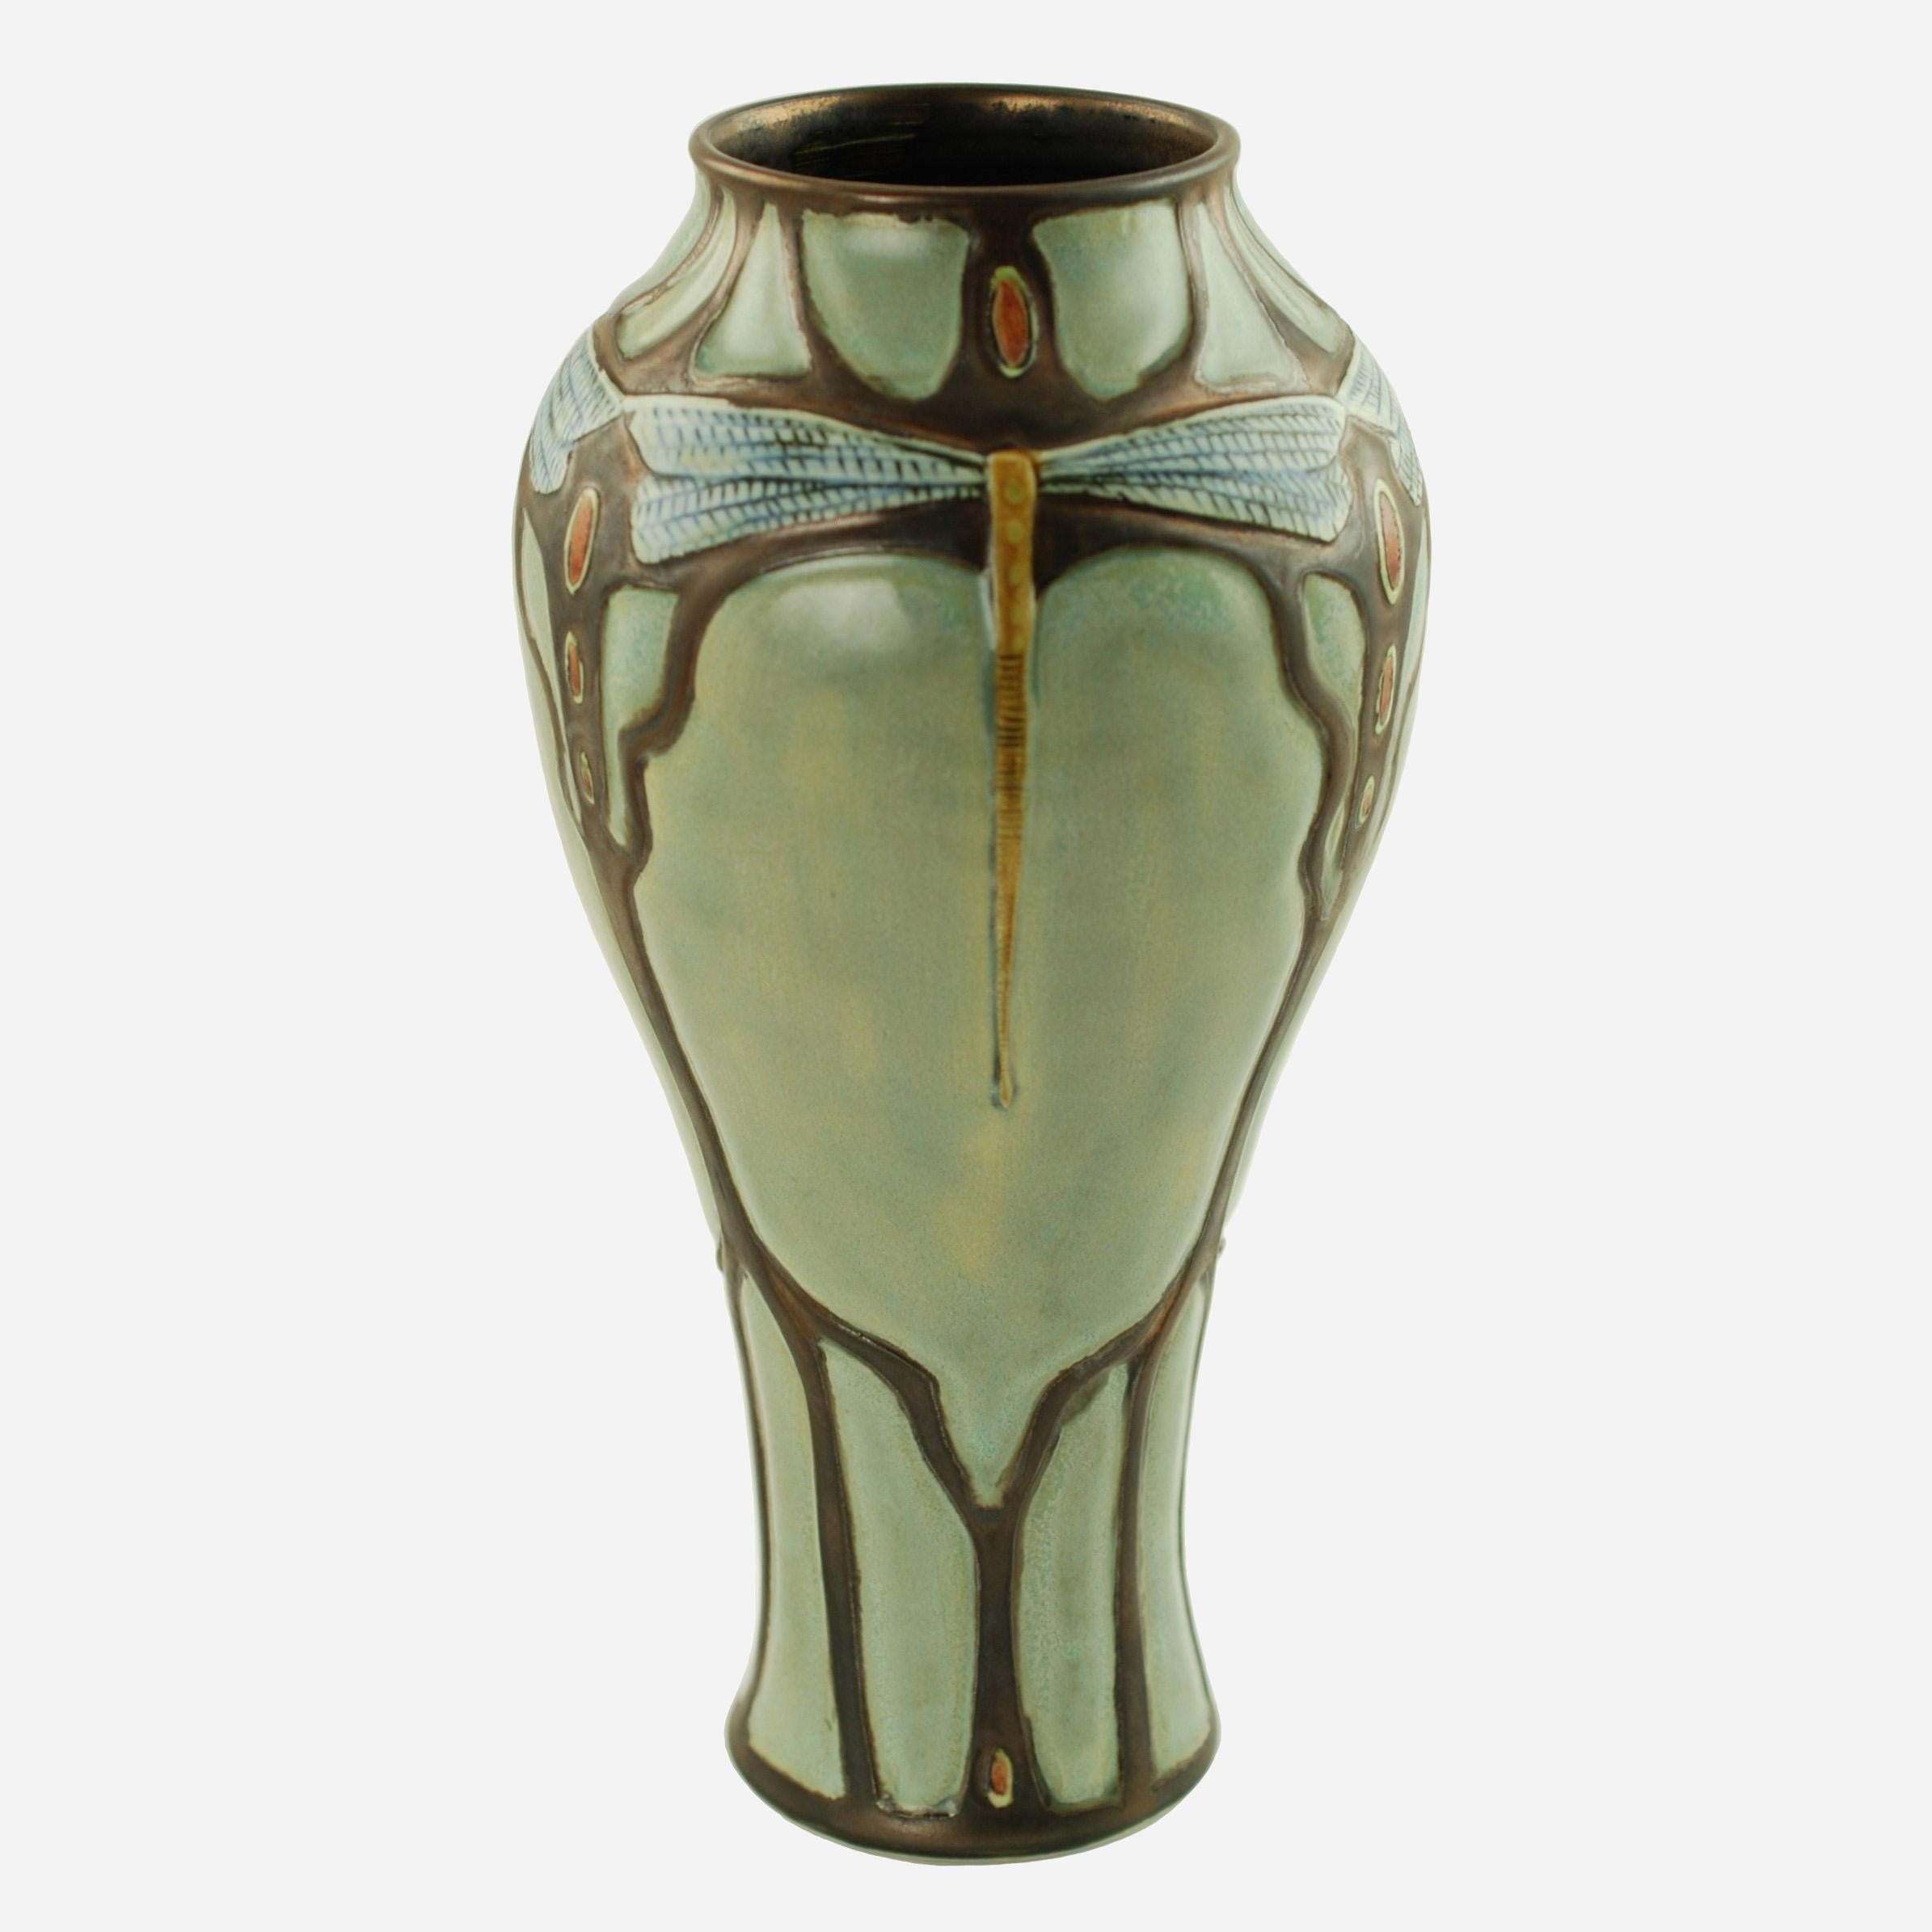 This lovely Art Nouveau-style vase was made by New Hampshire-based artisan Stephanie Young of Calmwater Designs.  The hand-thrown porcelain vase has a classic baluster form with hand-carved decoration and features three large dragonflies with long